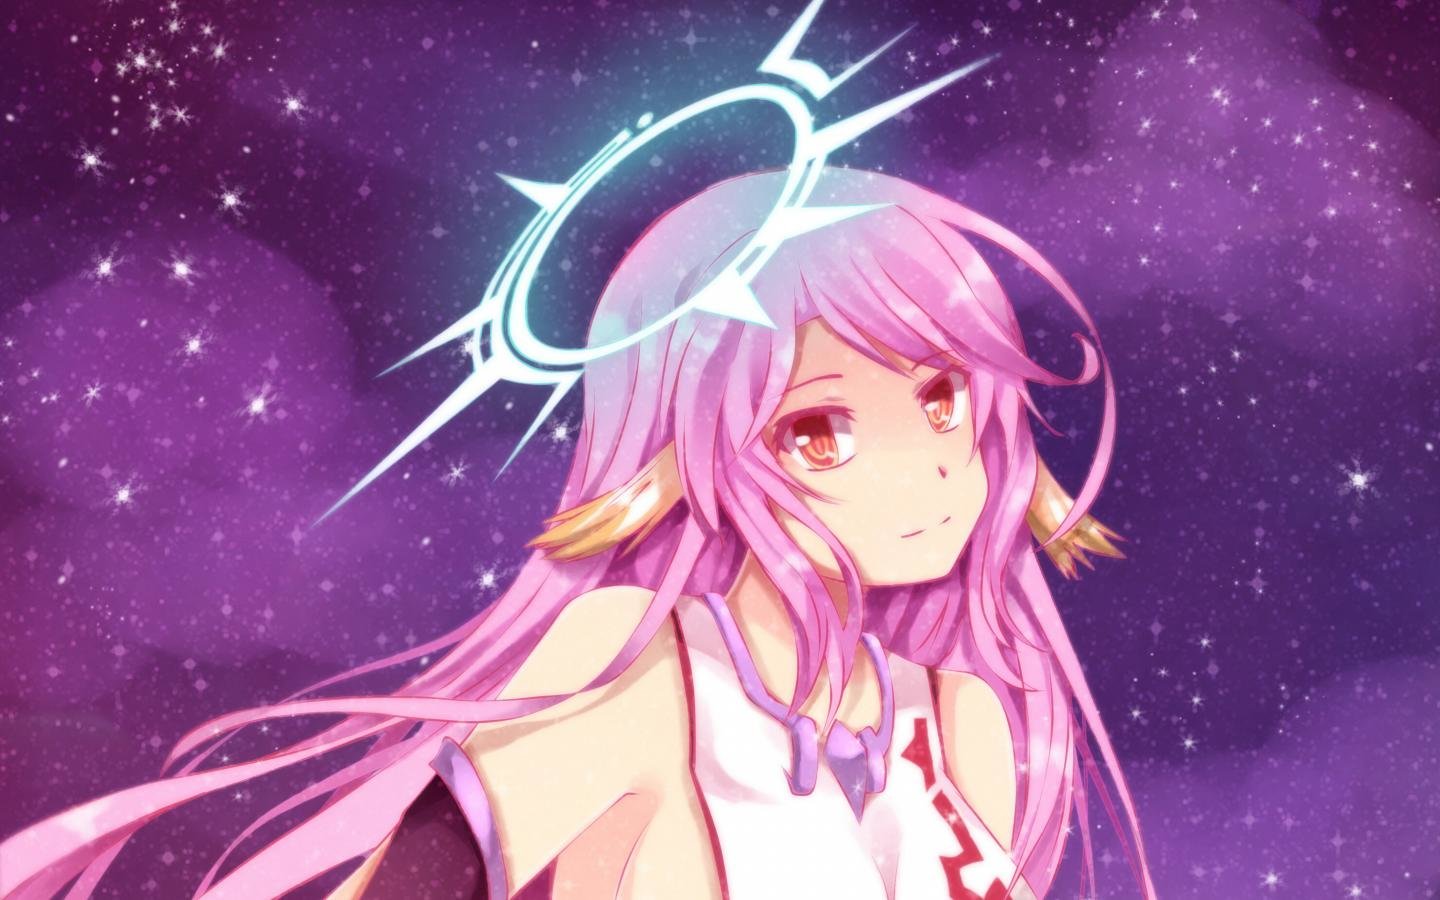 Best Jibril No Game No Life Wallpaper Id102609 For High